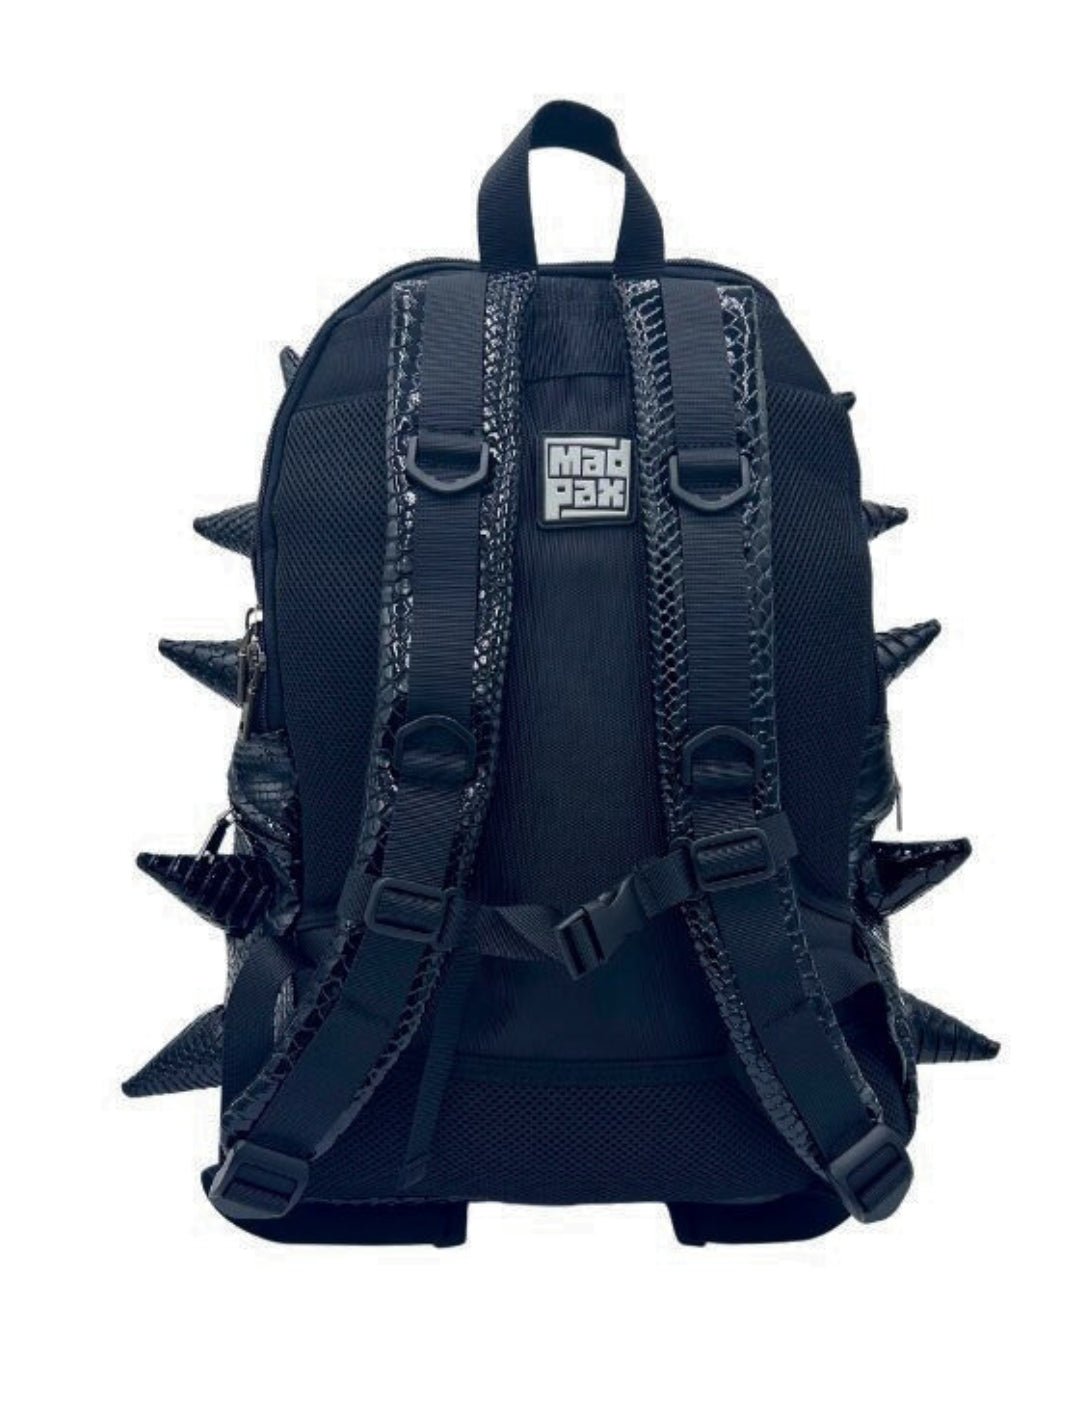 Black Out Black Backpack - Madpax